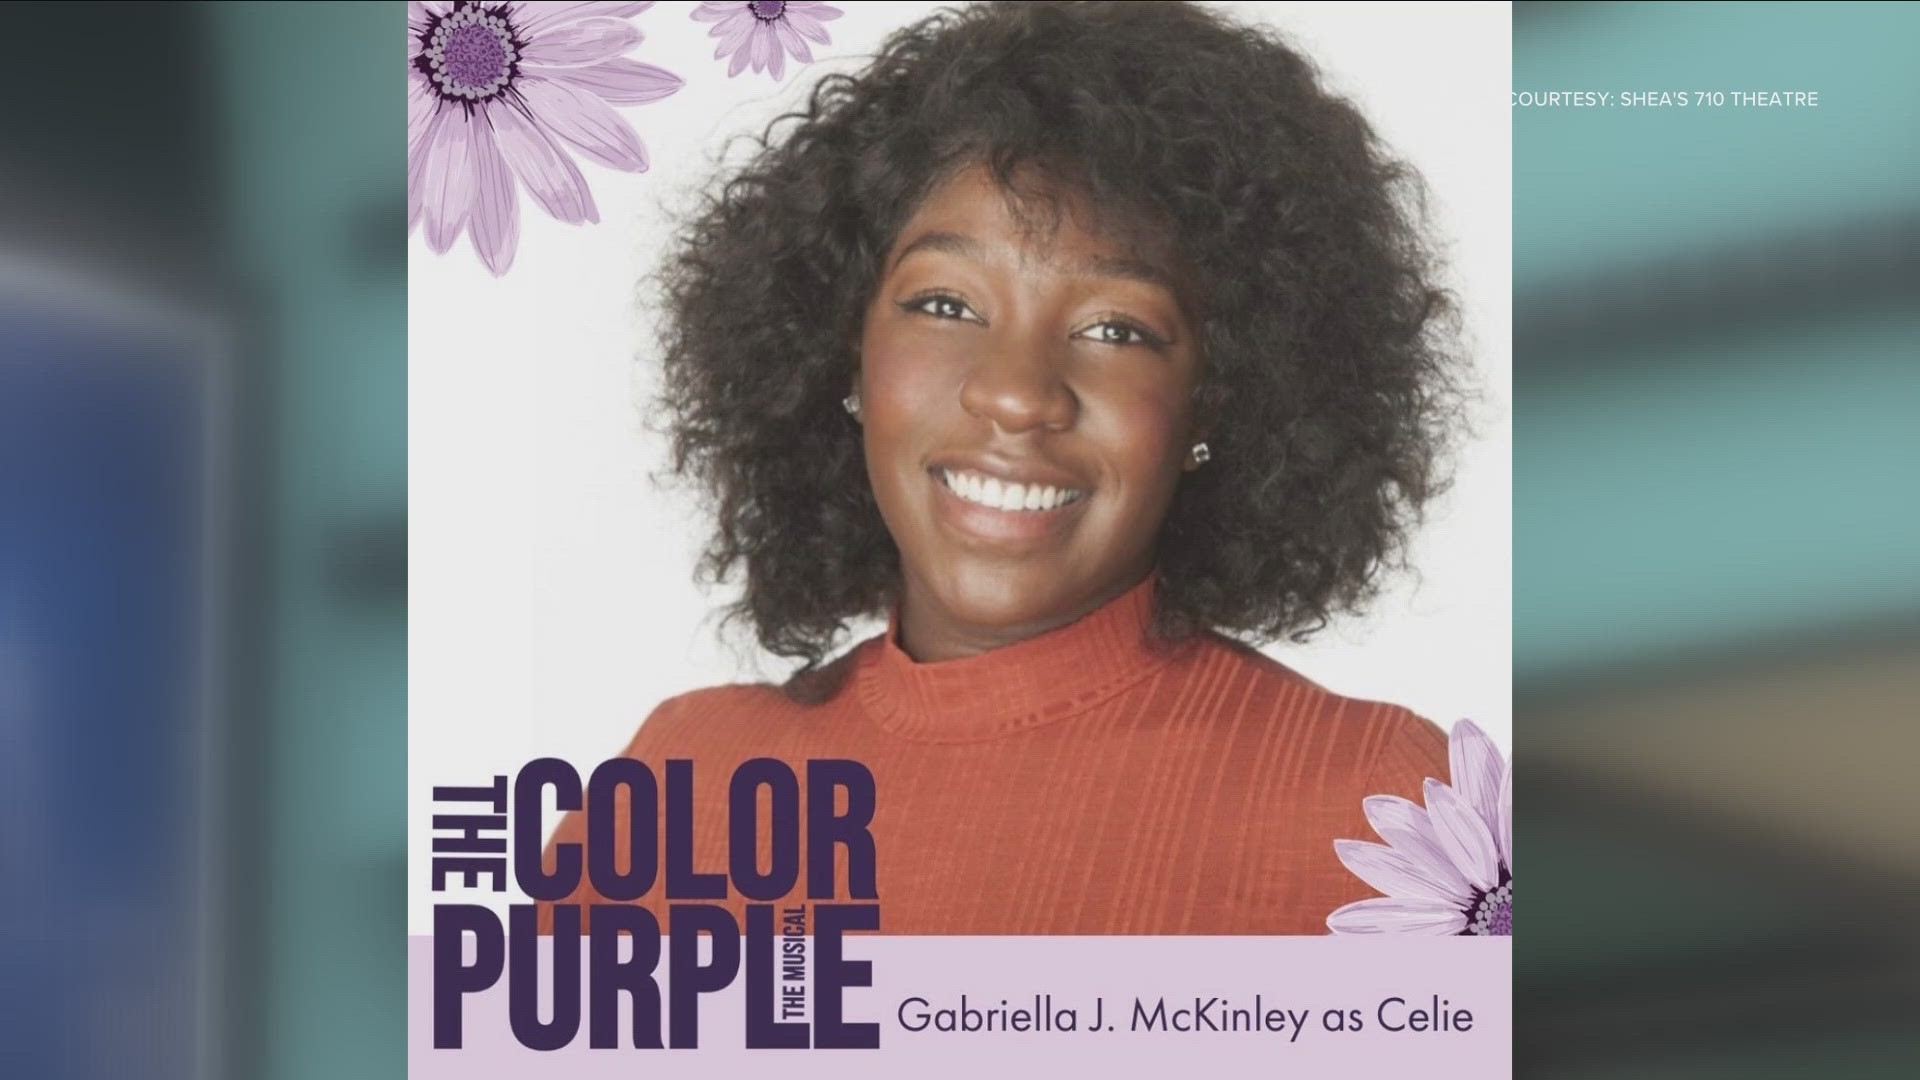 Daybreak's Lauren Hall gives us a preview of The Color Purple opening at the 710 Theatre.